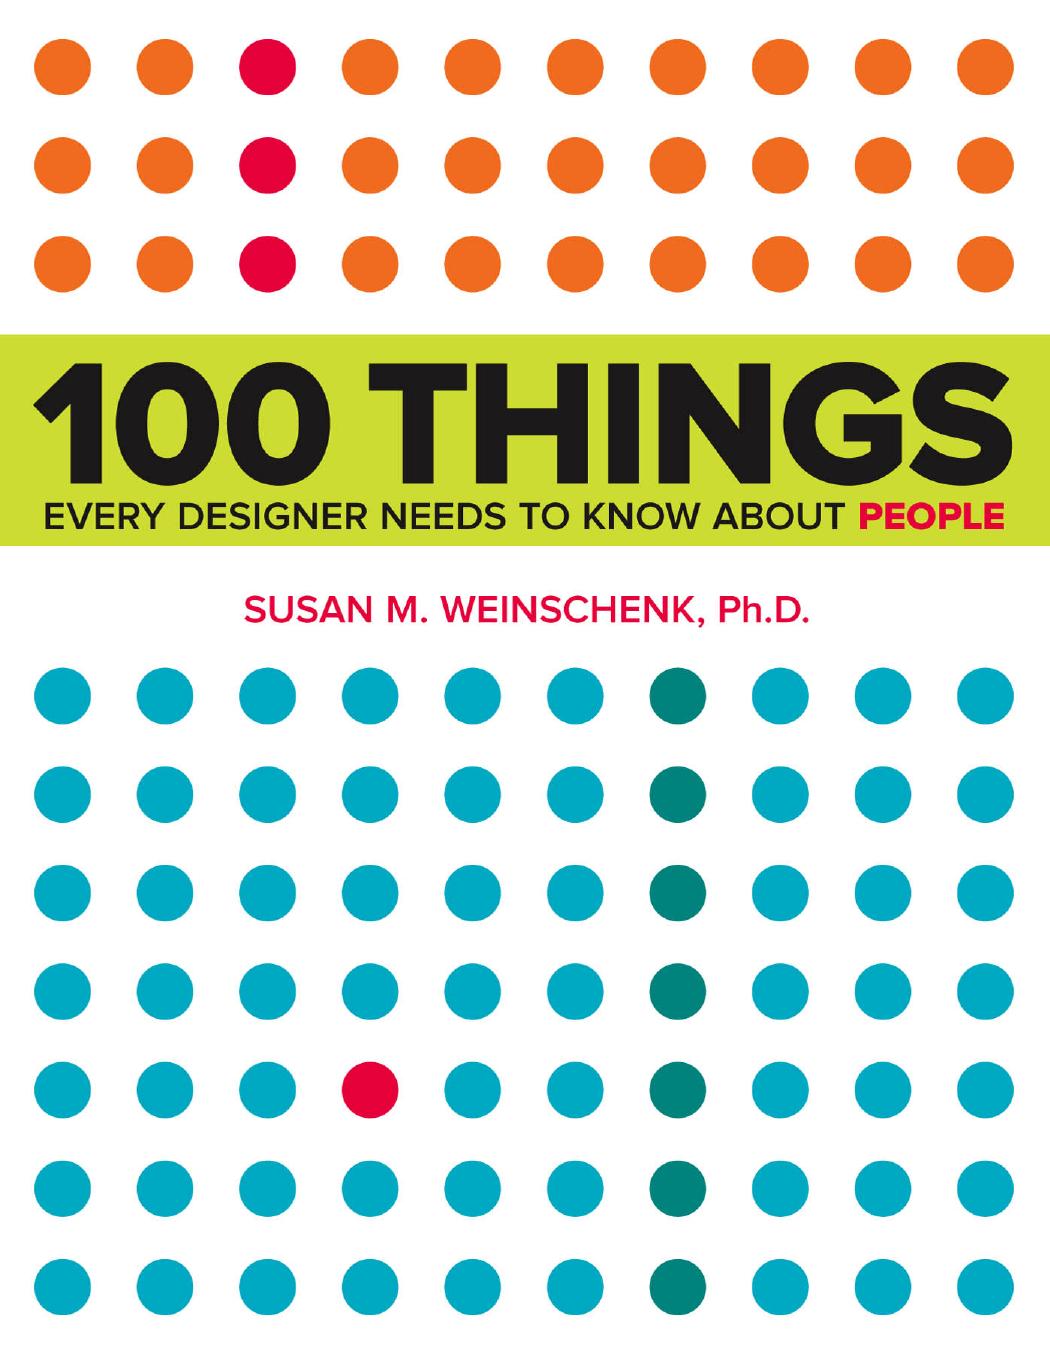 100 Things Every Designer Needs to Know About People by Unknown